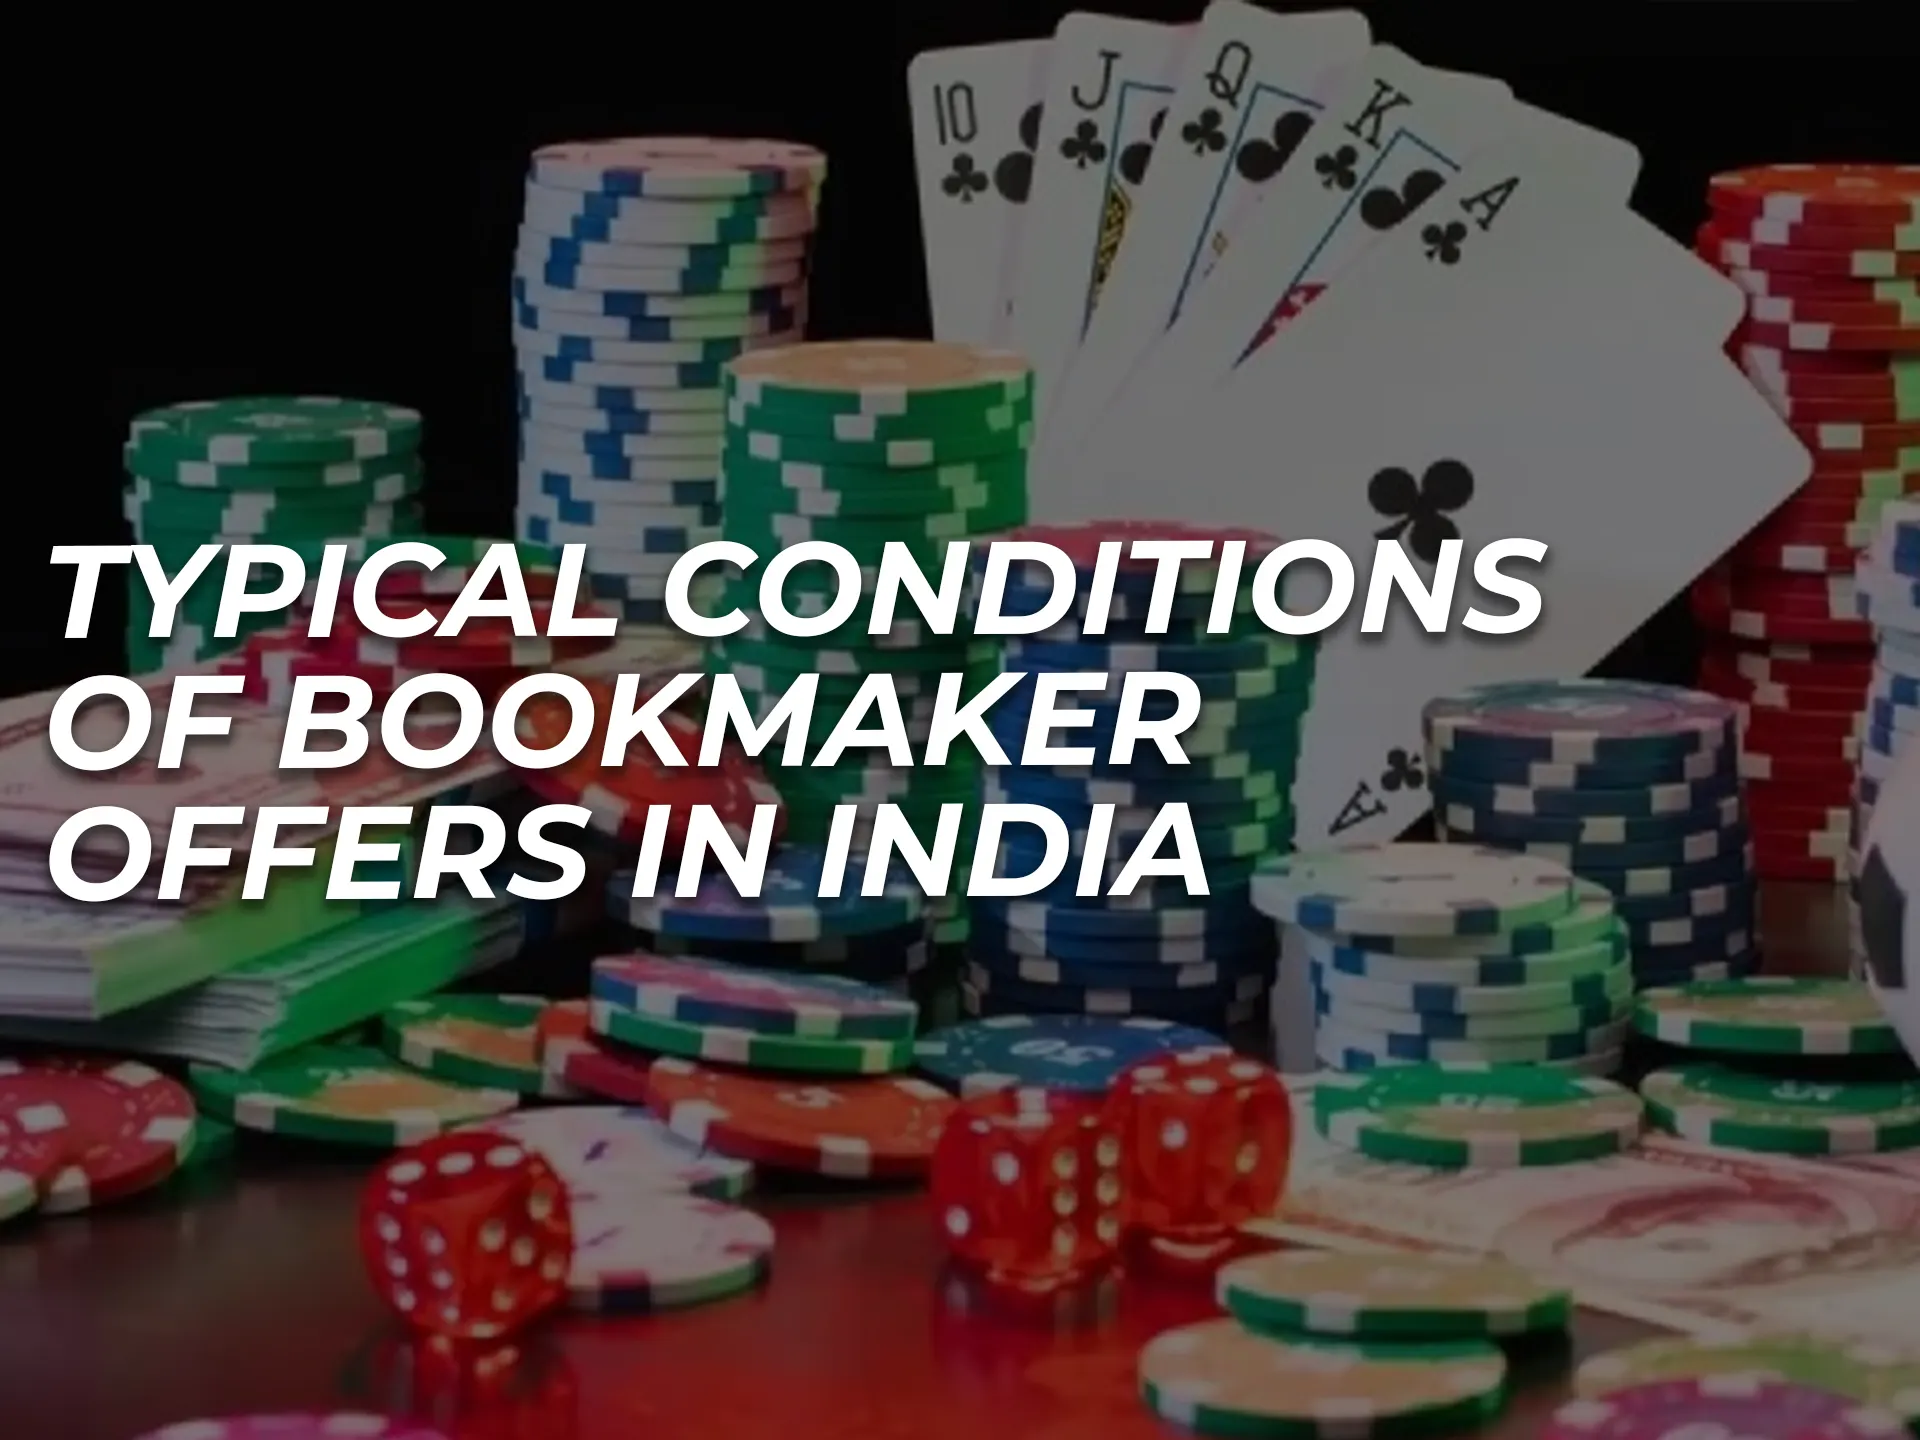 Learn some typical conditions when dealing with bookmakers in India.